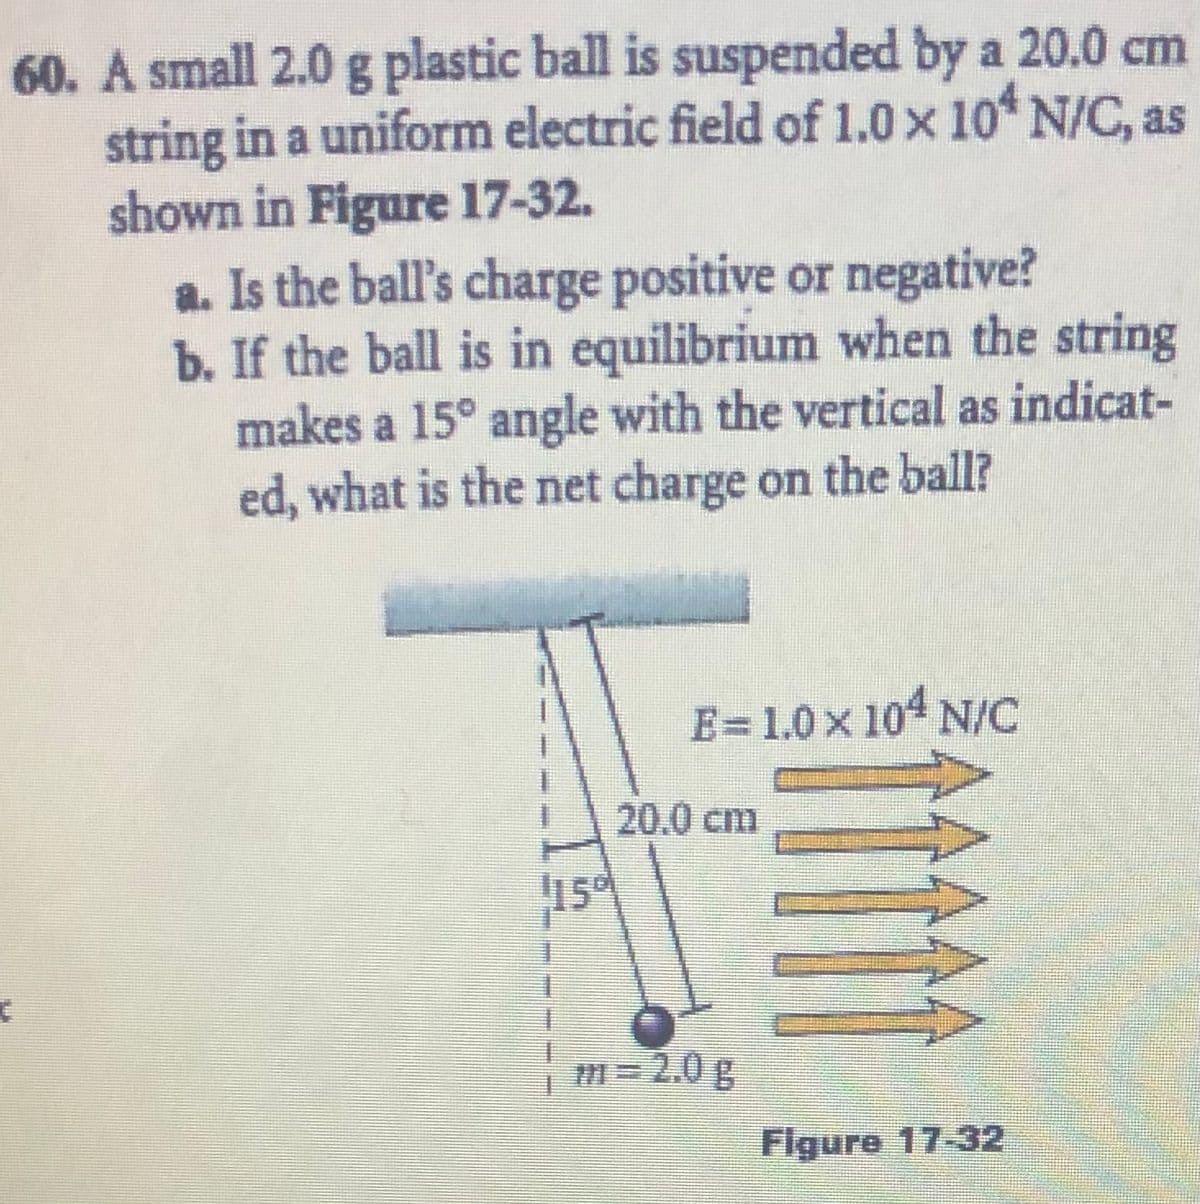 60. A small 2.0 g plastic ball is suspended by a 20.0 cm
string in a uniform electric field of 1.0 x 10 N/C, as
shown in Figure 17-32.
a. Is the ball's charge positive or negative?
b. If the ball is in equilibrium when the string
makes a 15° angle with the vertical as indicat-
ed, what is the net charge on the ball?
E=1.0 x 104 N/C
20.0 cm
m=2.0g
Figure 17-32
5.
